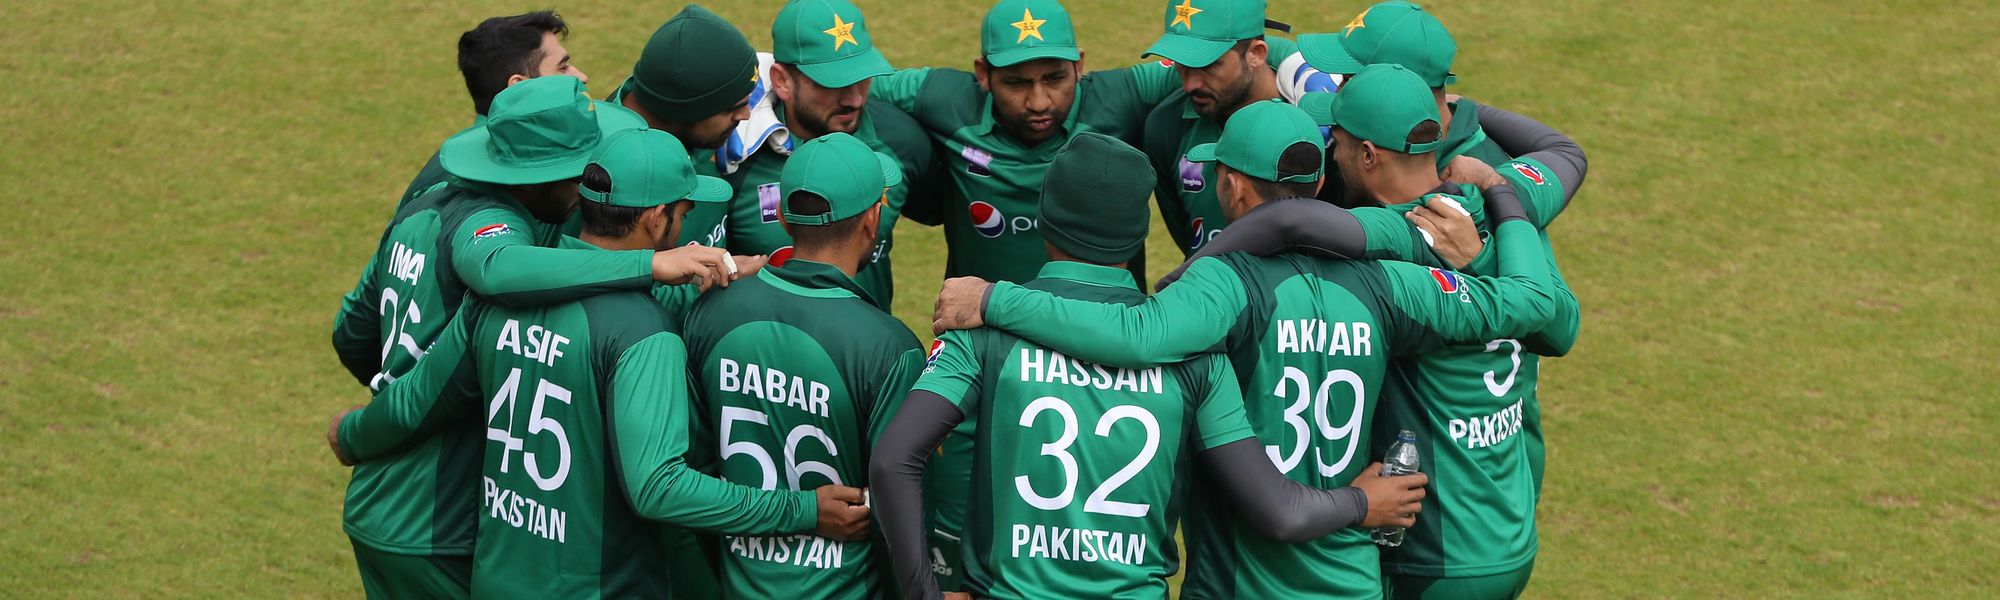 Predictable losers Pakistan take on England